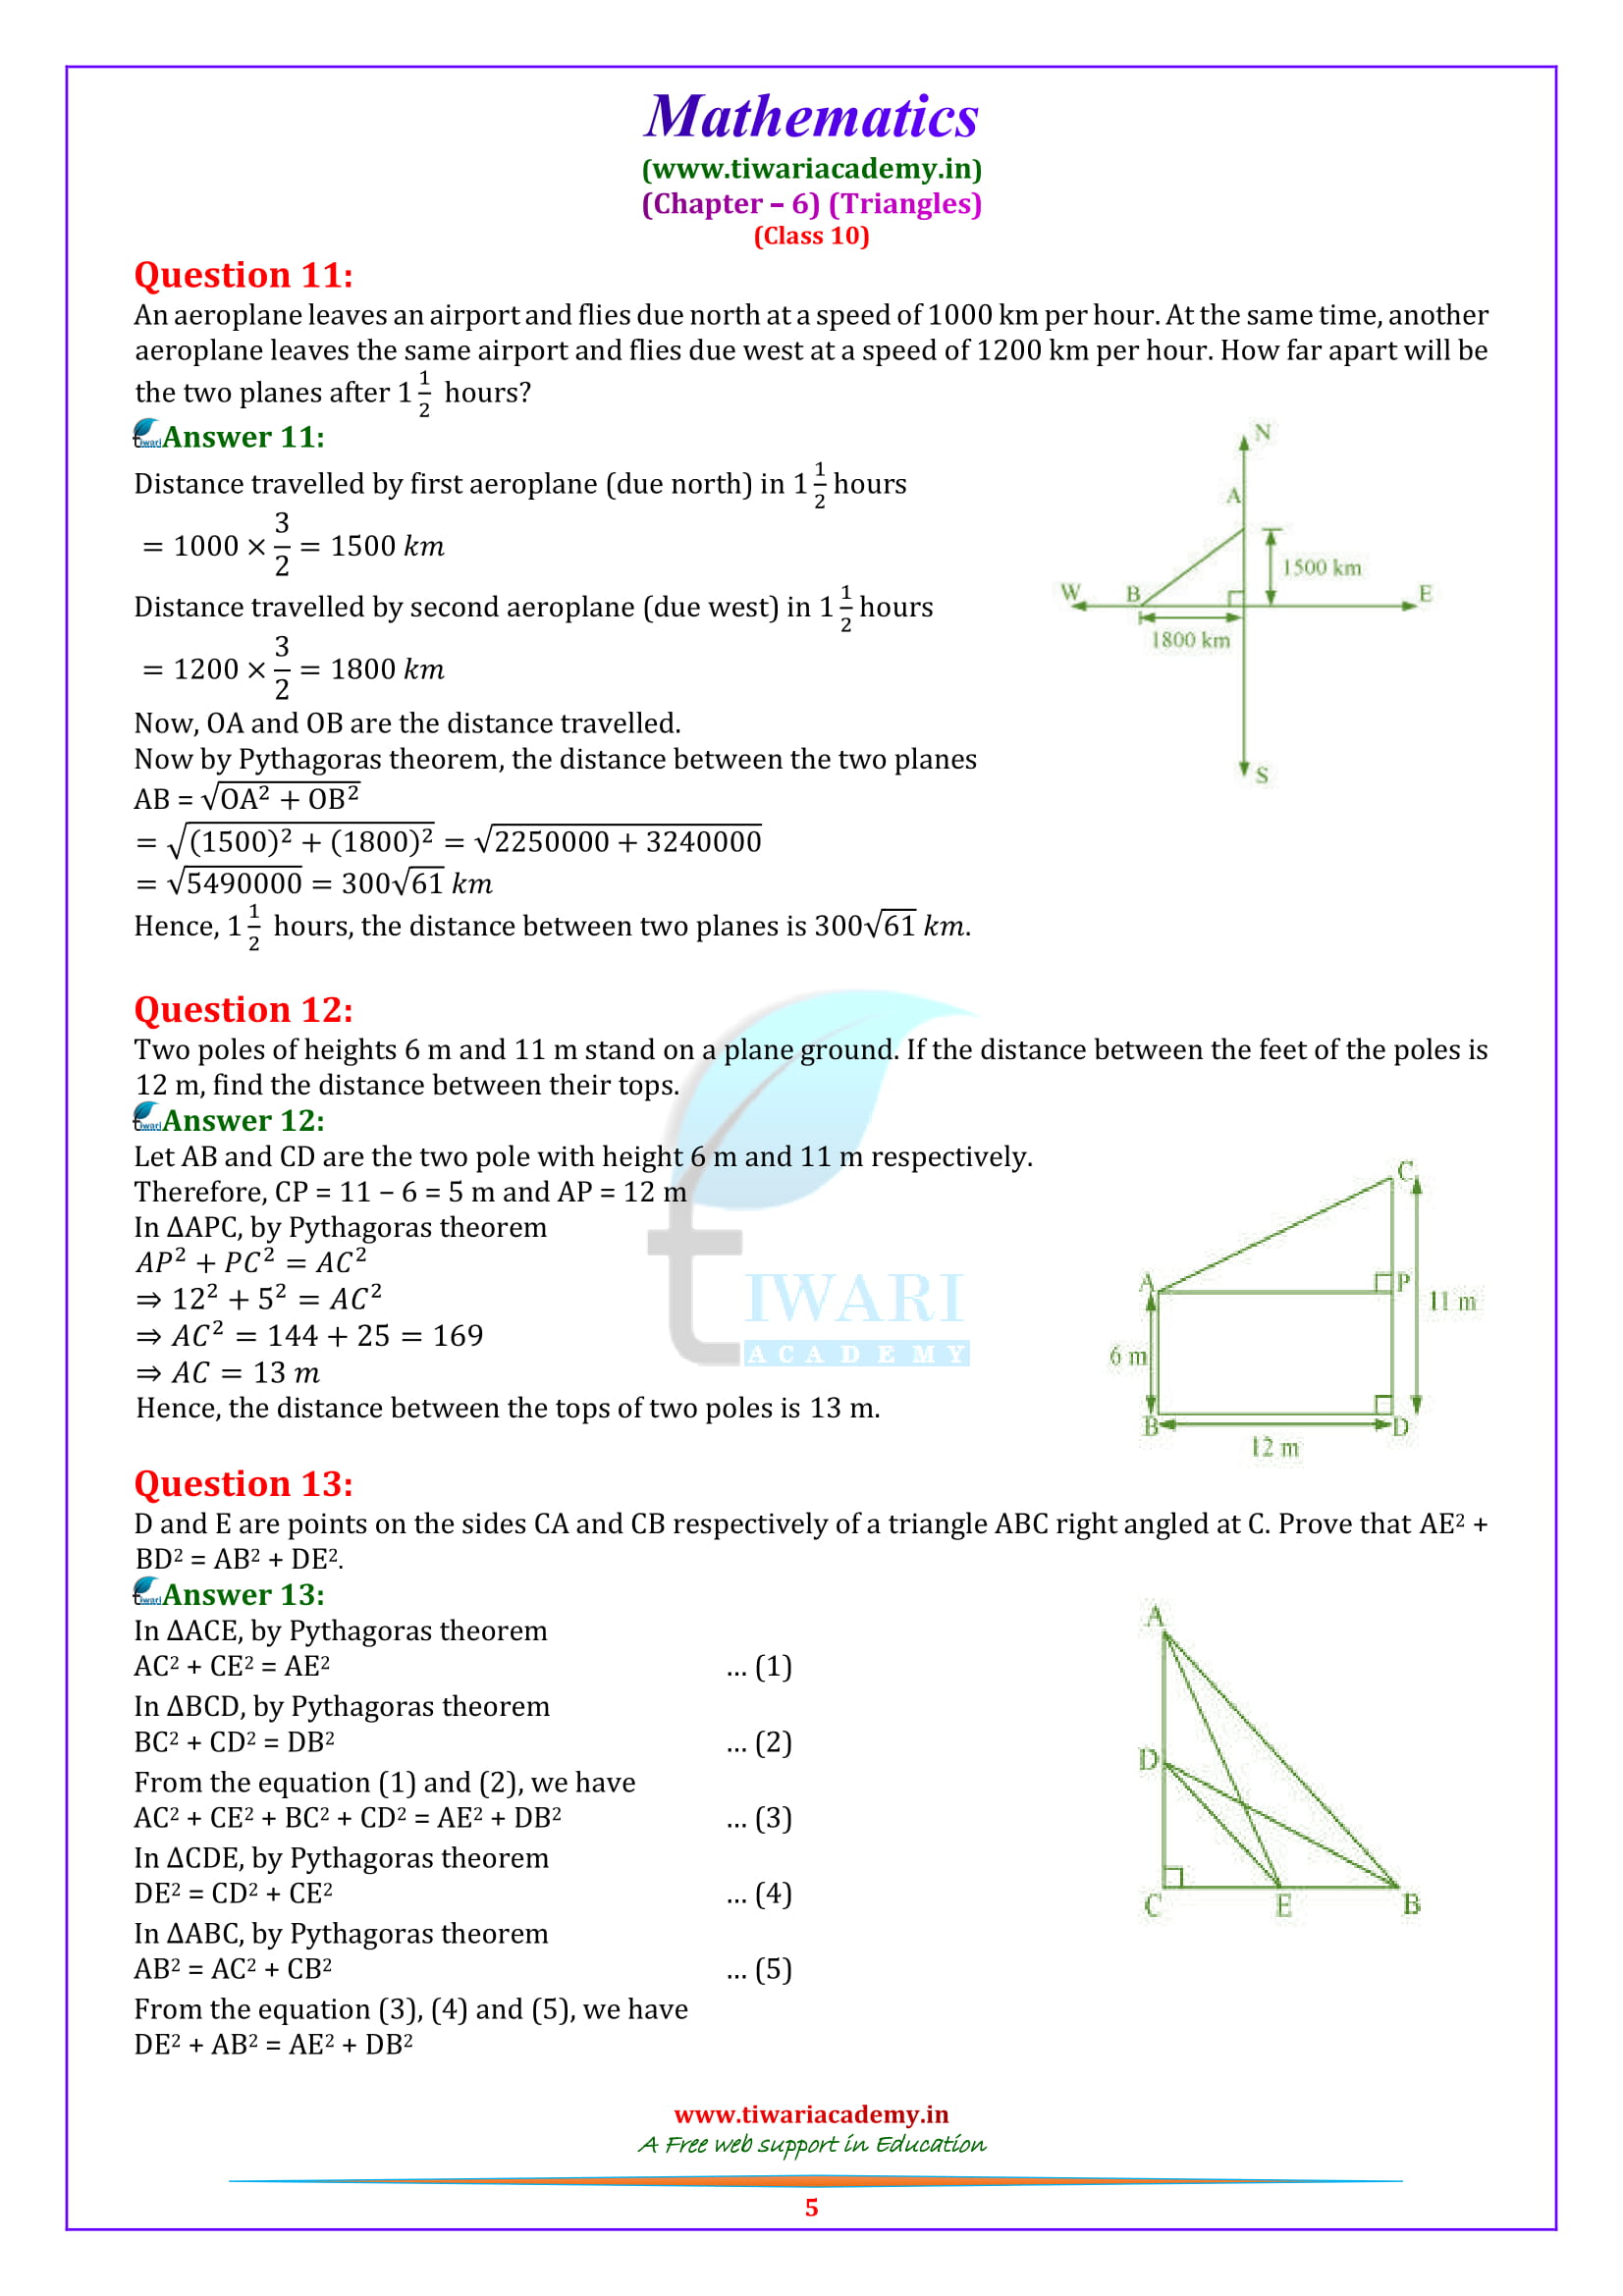 10 Maths Exercise 6.5 solutions questions 1, 2, 3, 4, 5, 6, 7, 8, 9